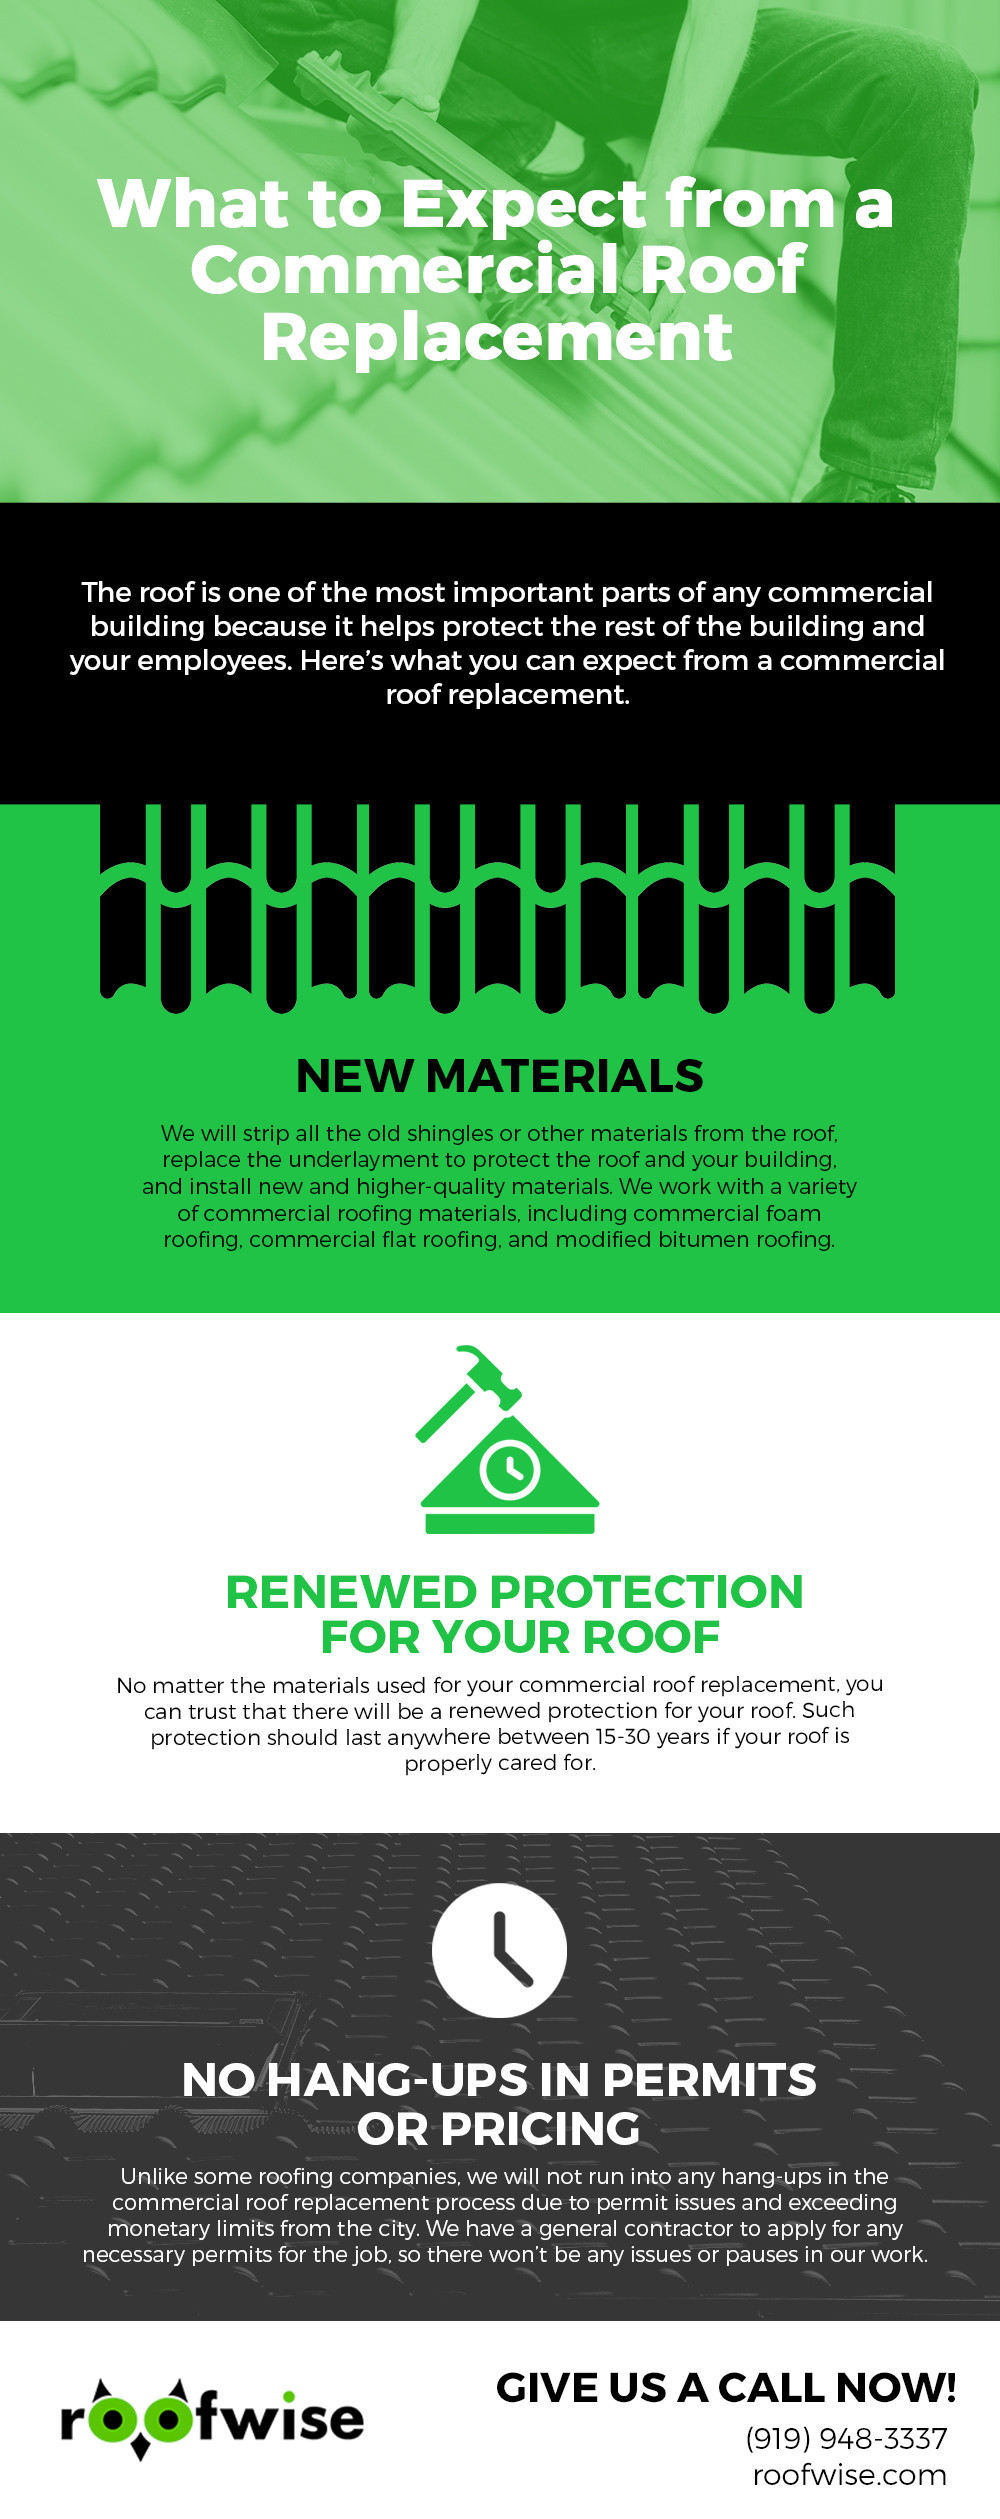 What to Expect from a Commercial Roof Replacement [infographic]